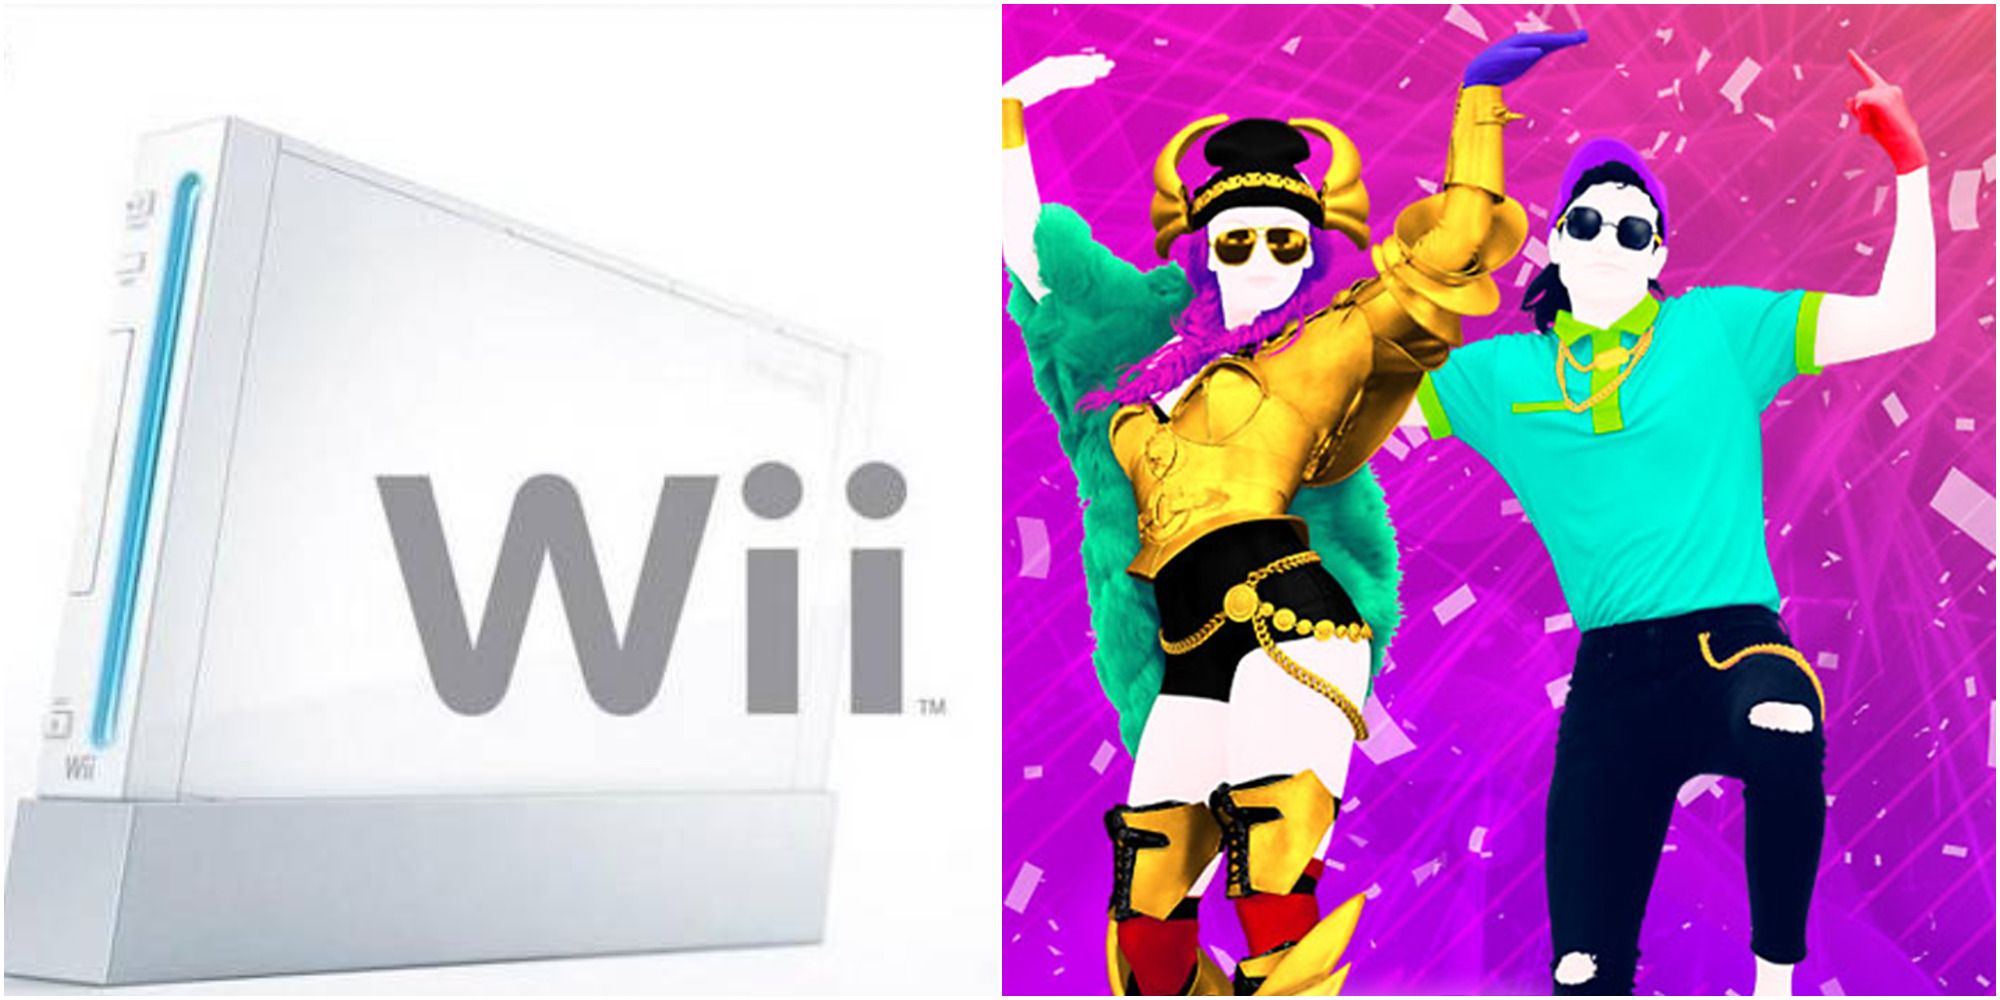 Nintendo Wii and Just Dance 2020 cover art